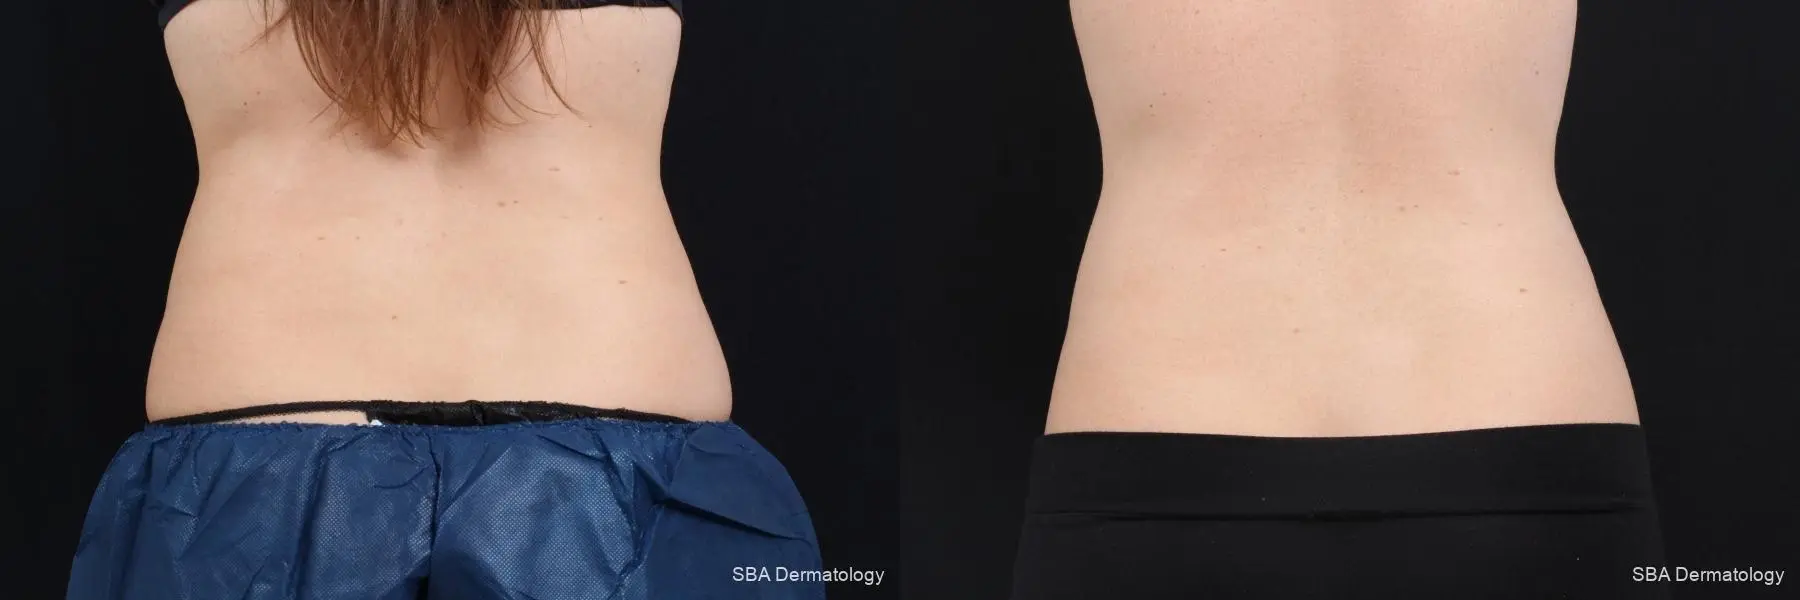 Coolsculpting: Patient 7 - Before and After 5